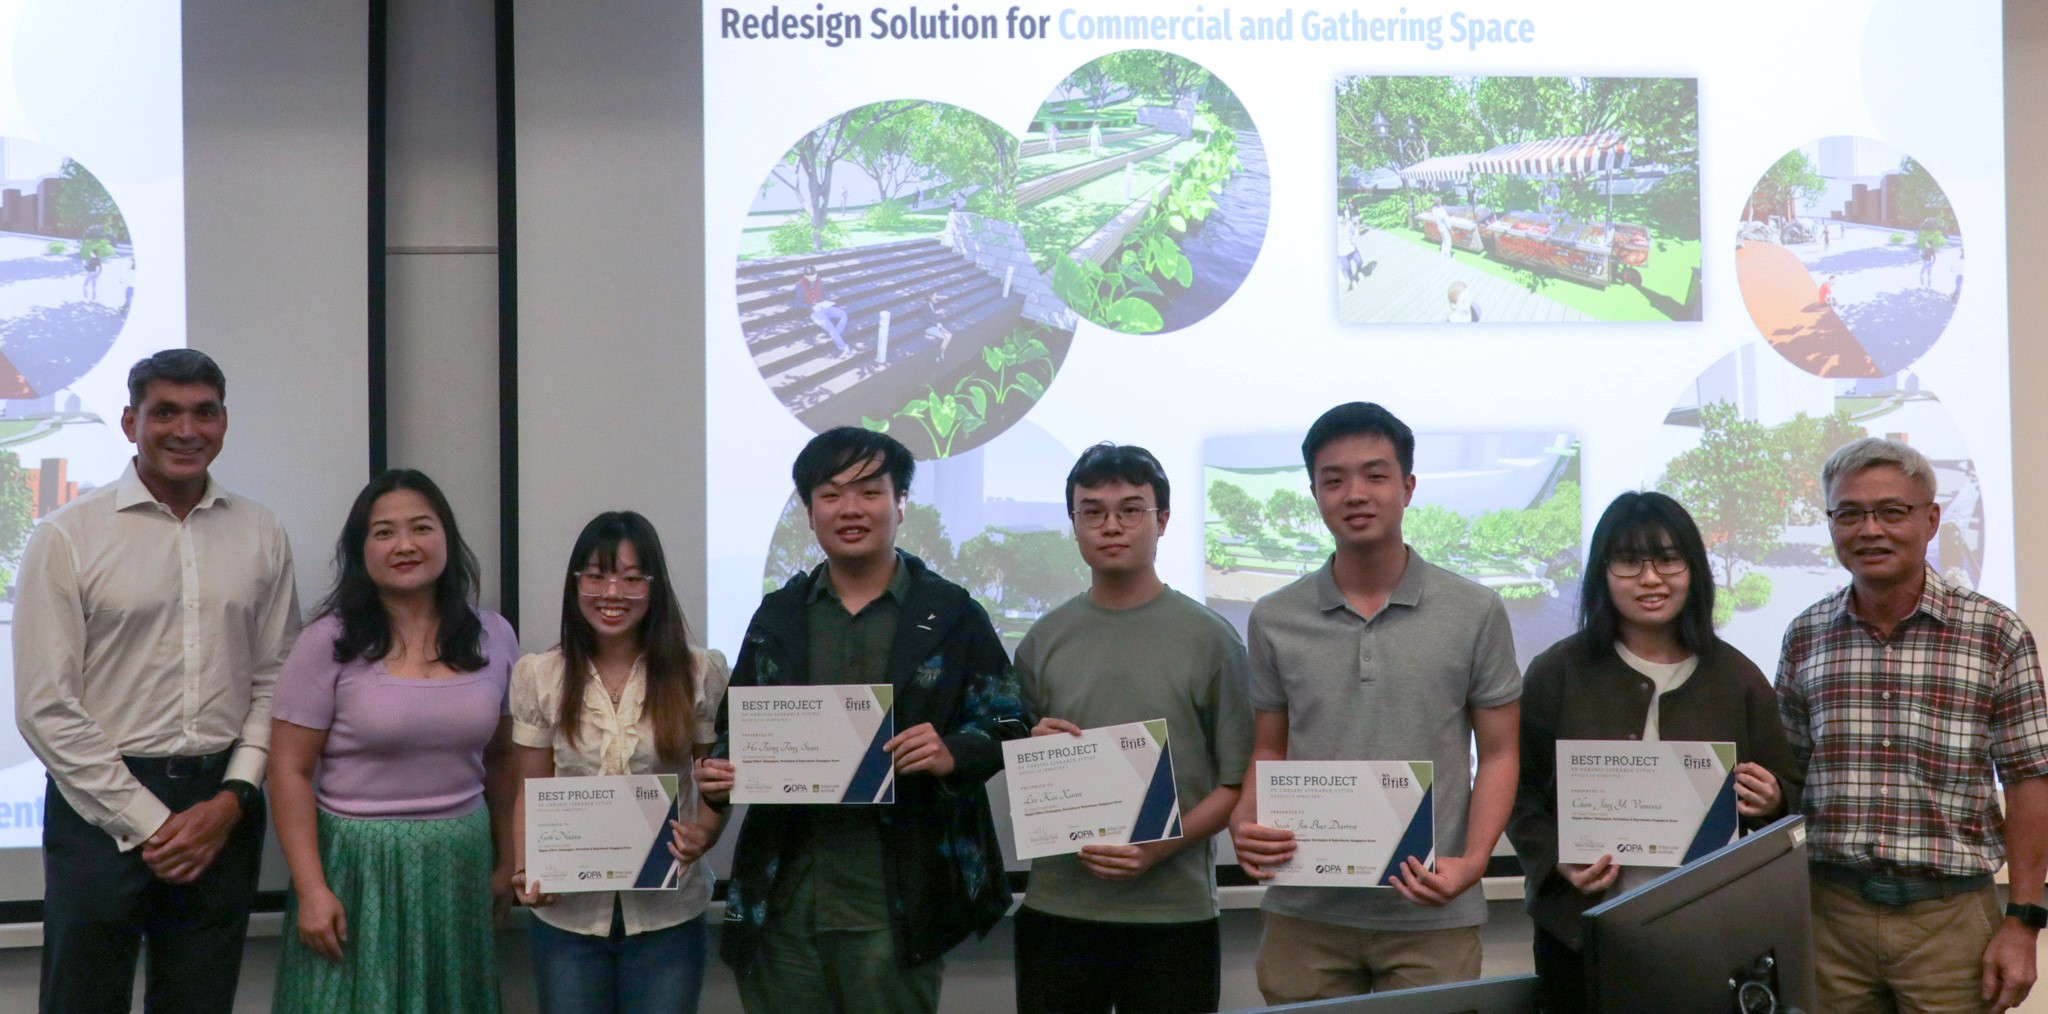 Lee Kwong Weng’s winning team at the certificate presentation for the first Liveable Cities Best Project competition on 19 Dec 2023. From left to right: Mr Benett Theiseira (Chair, ULI Singapore); Ms Chan Hui Min (Director, DP Architects); Goh Nuoxu (Mechanical Engineering); Ho Tiong Teng, Sean (Landscape Architecture); Lee Kai Xuan (Biomedical Engineering); Seah Jin Bao Darren (Industrial &amp; Systems Engineering); Chen Jing Yi, Vanessa (Materials Science &amp; Engineering); Mr Lee Kwong Weng (Studio Leader). One more member of the team, Fiona Chua Pei Xuan (Biomedical Engineering), was unable to attend the ceremony. 